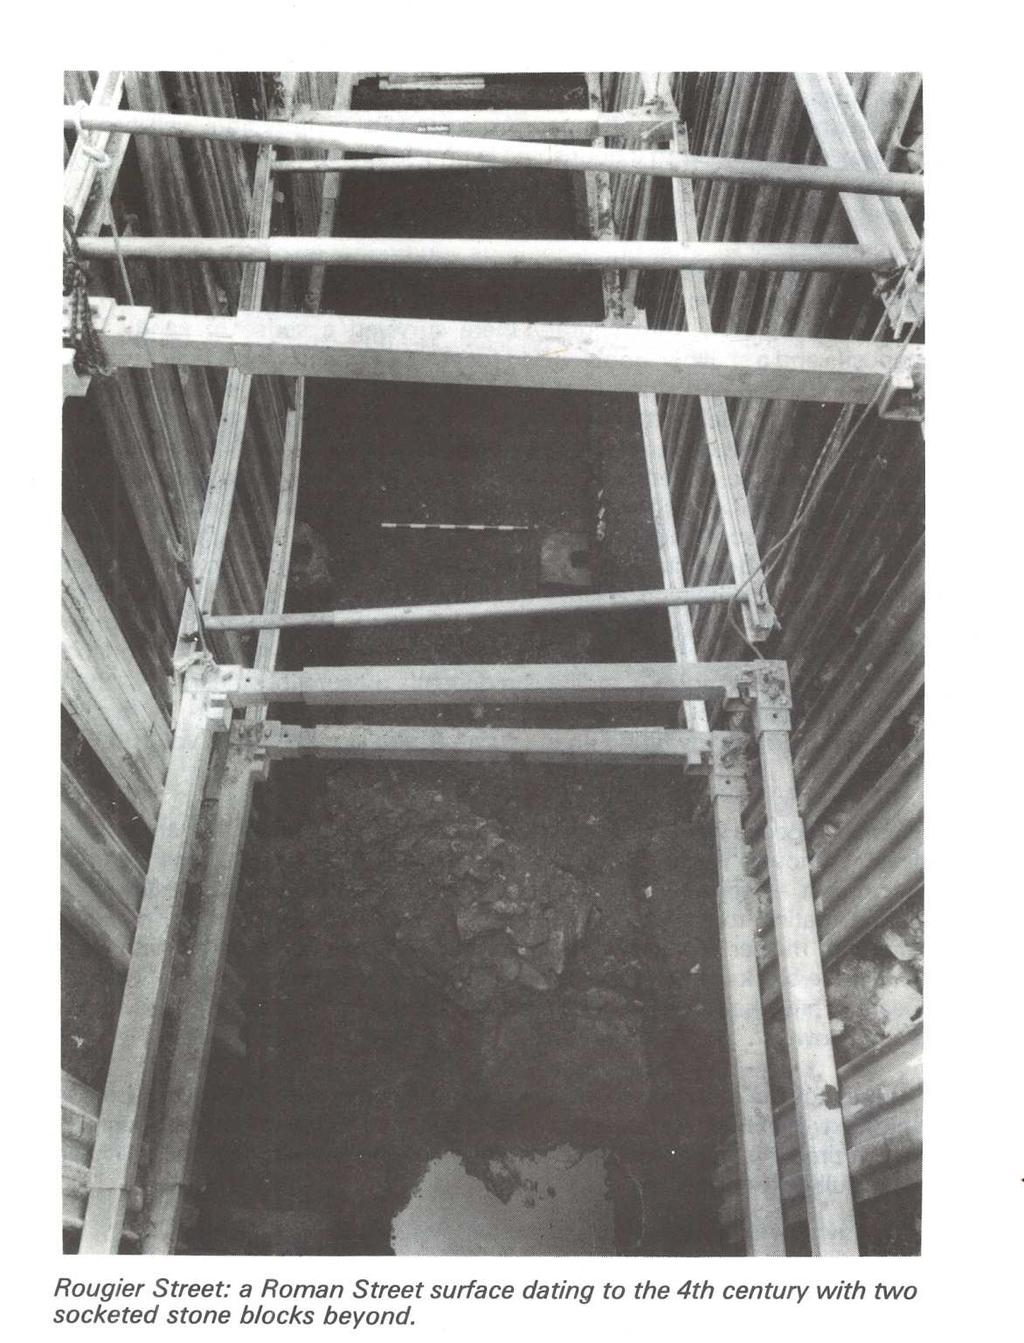 York Archaeological Trust 10 main channel, which was interpreted as a probable drain from an adjacent building located to the south-west. Plate 6 A 4 th century Roman surface at 5 Rougier Street.